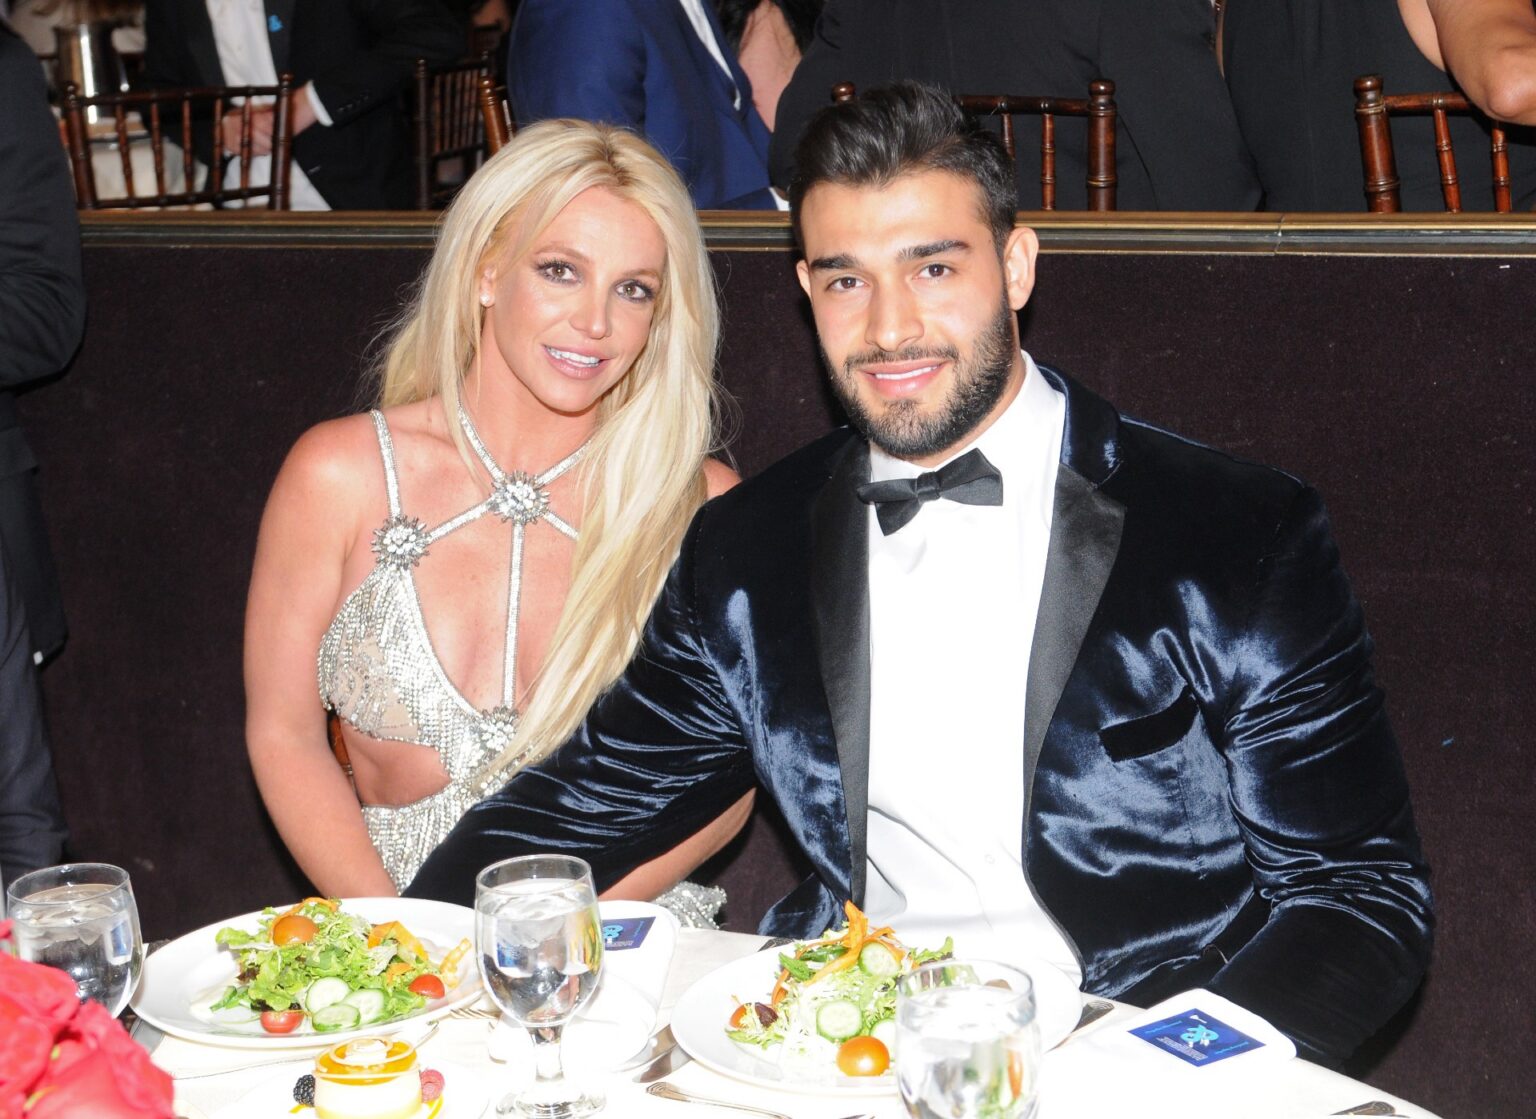 Britney Spears andBritney Spears and Sam Asghari are married